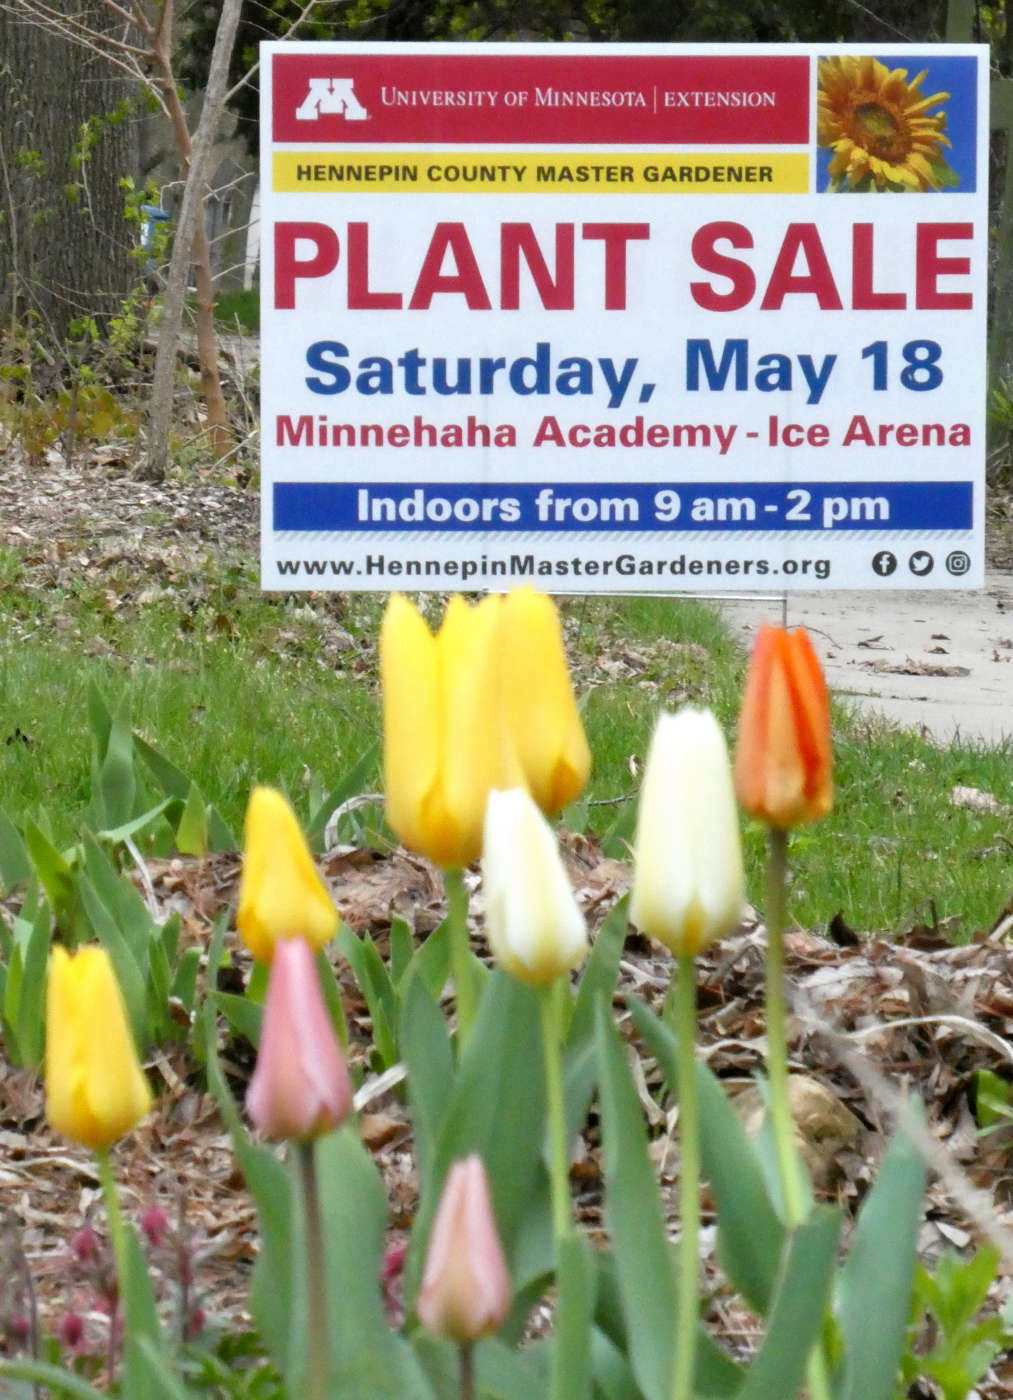 lawn sign behind tulips reading PLANT SALE, Saturday May 18, Minnehaha Academy - Ice Arena indoors from 9am - 2pm